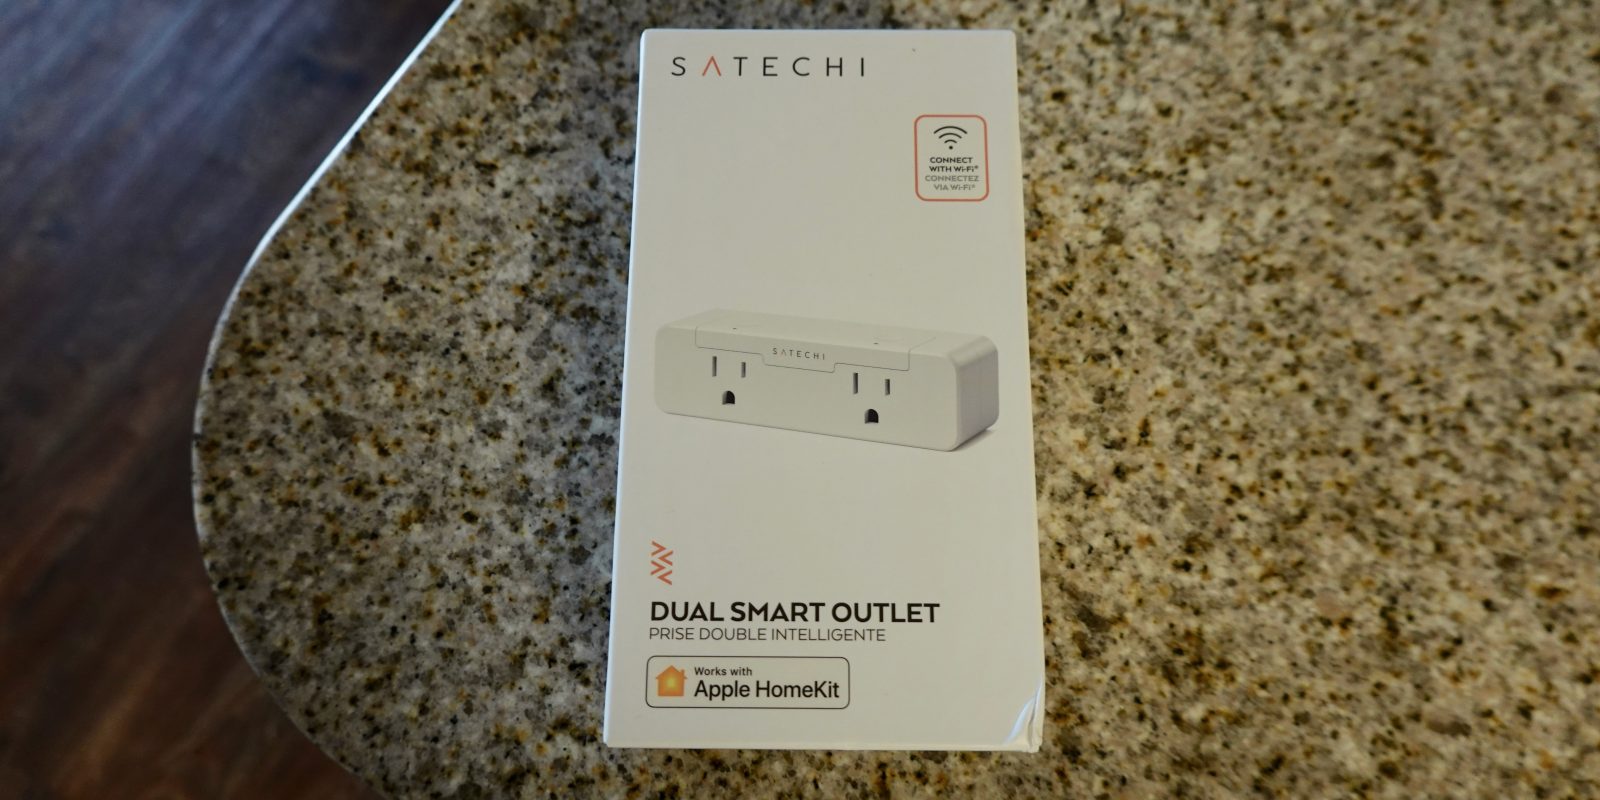 https://9to5mac.com/wp-content/uploads/sites/6/2019/06/satechi-dual-smart-outlet-lead.jpg?quality=82&strip=all&w=1600